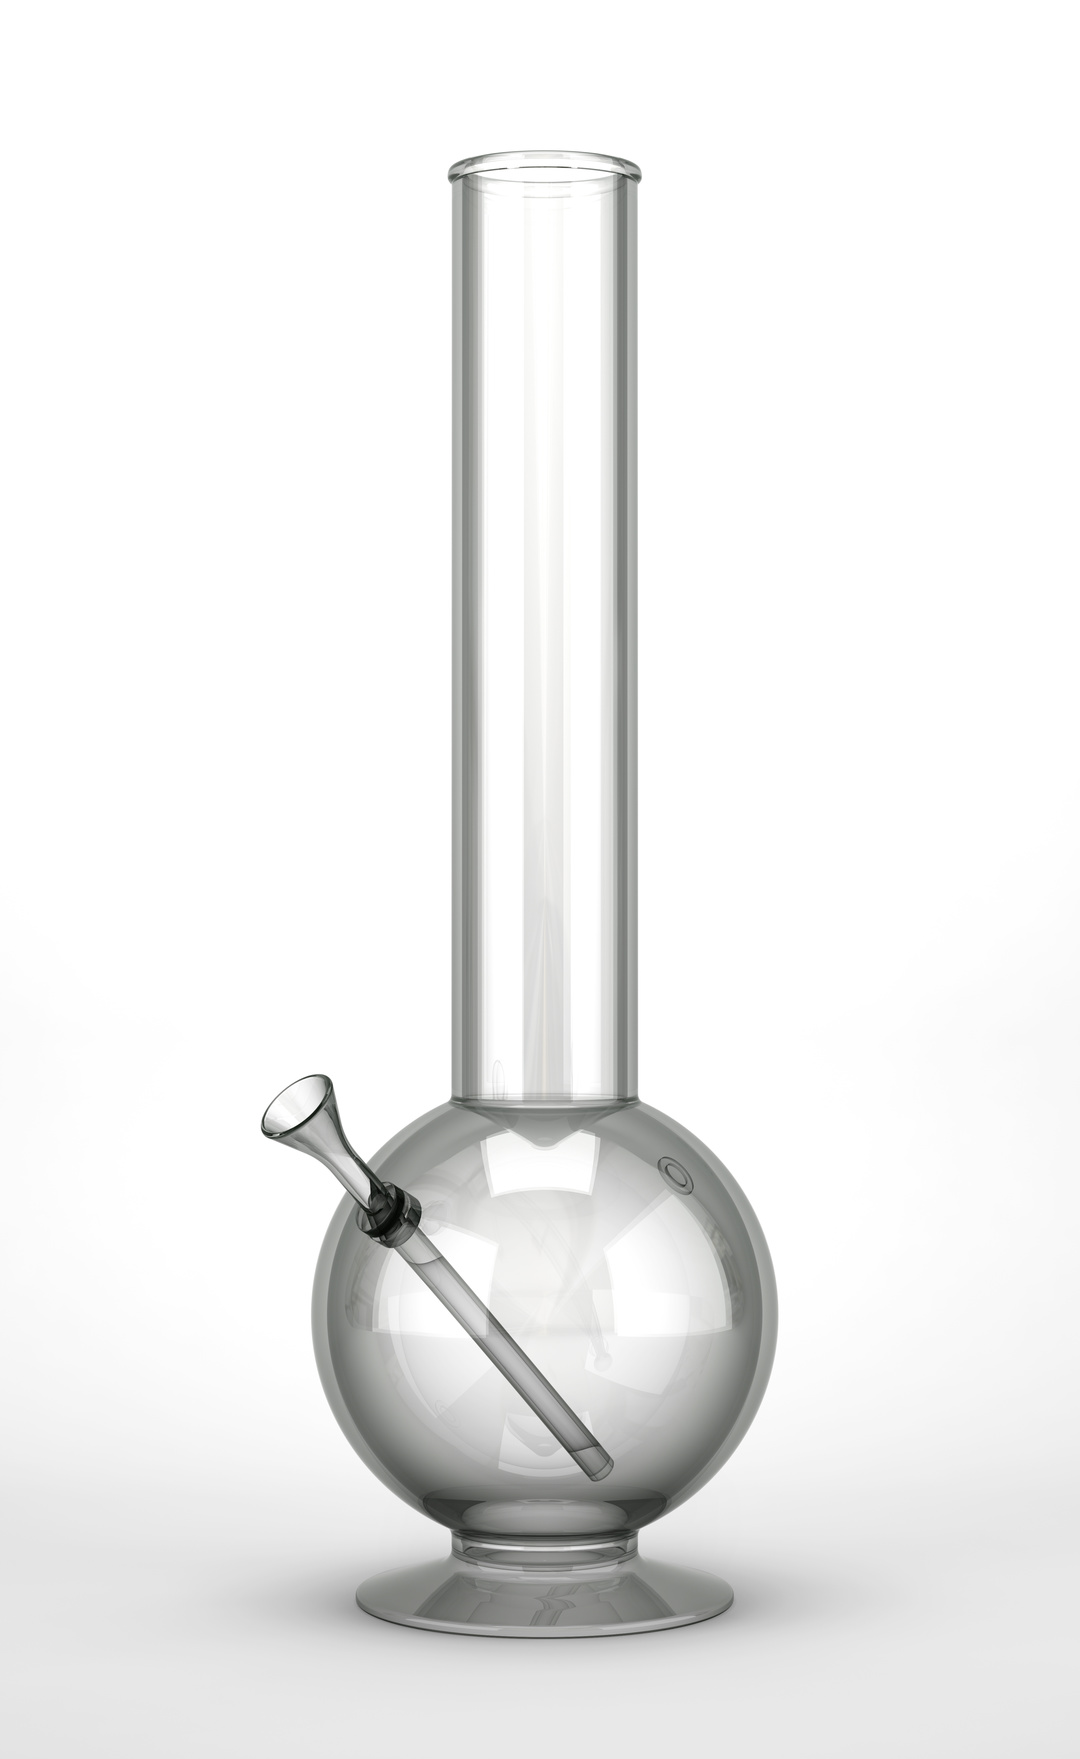 Informative facts about bongs